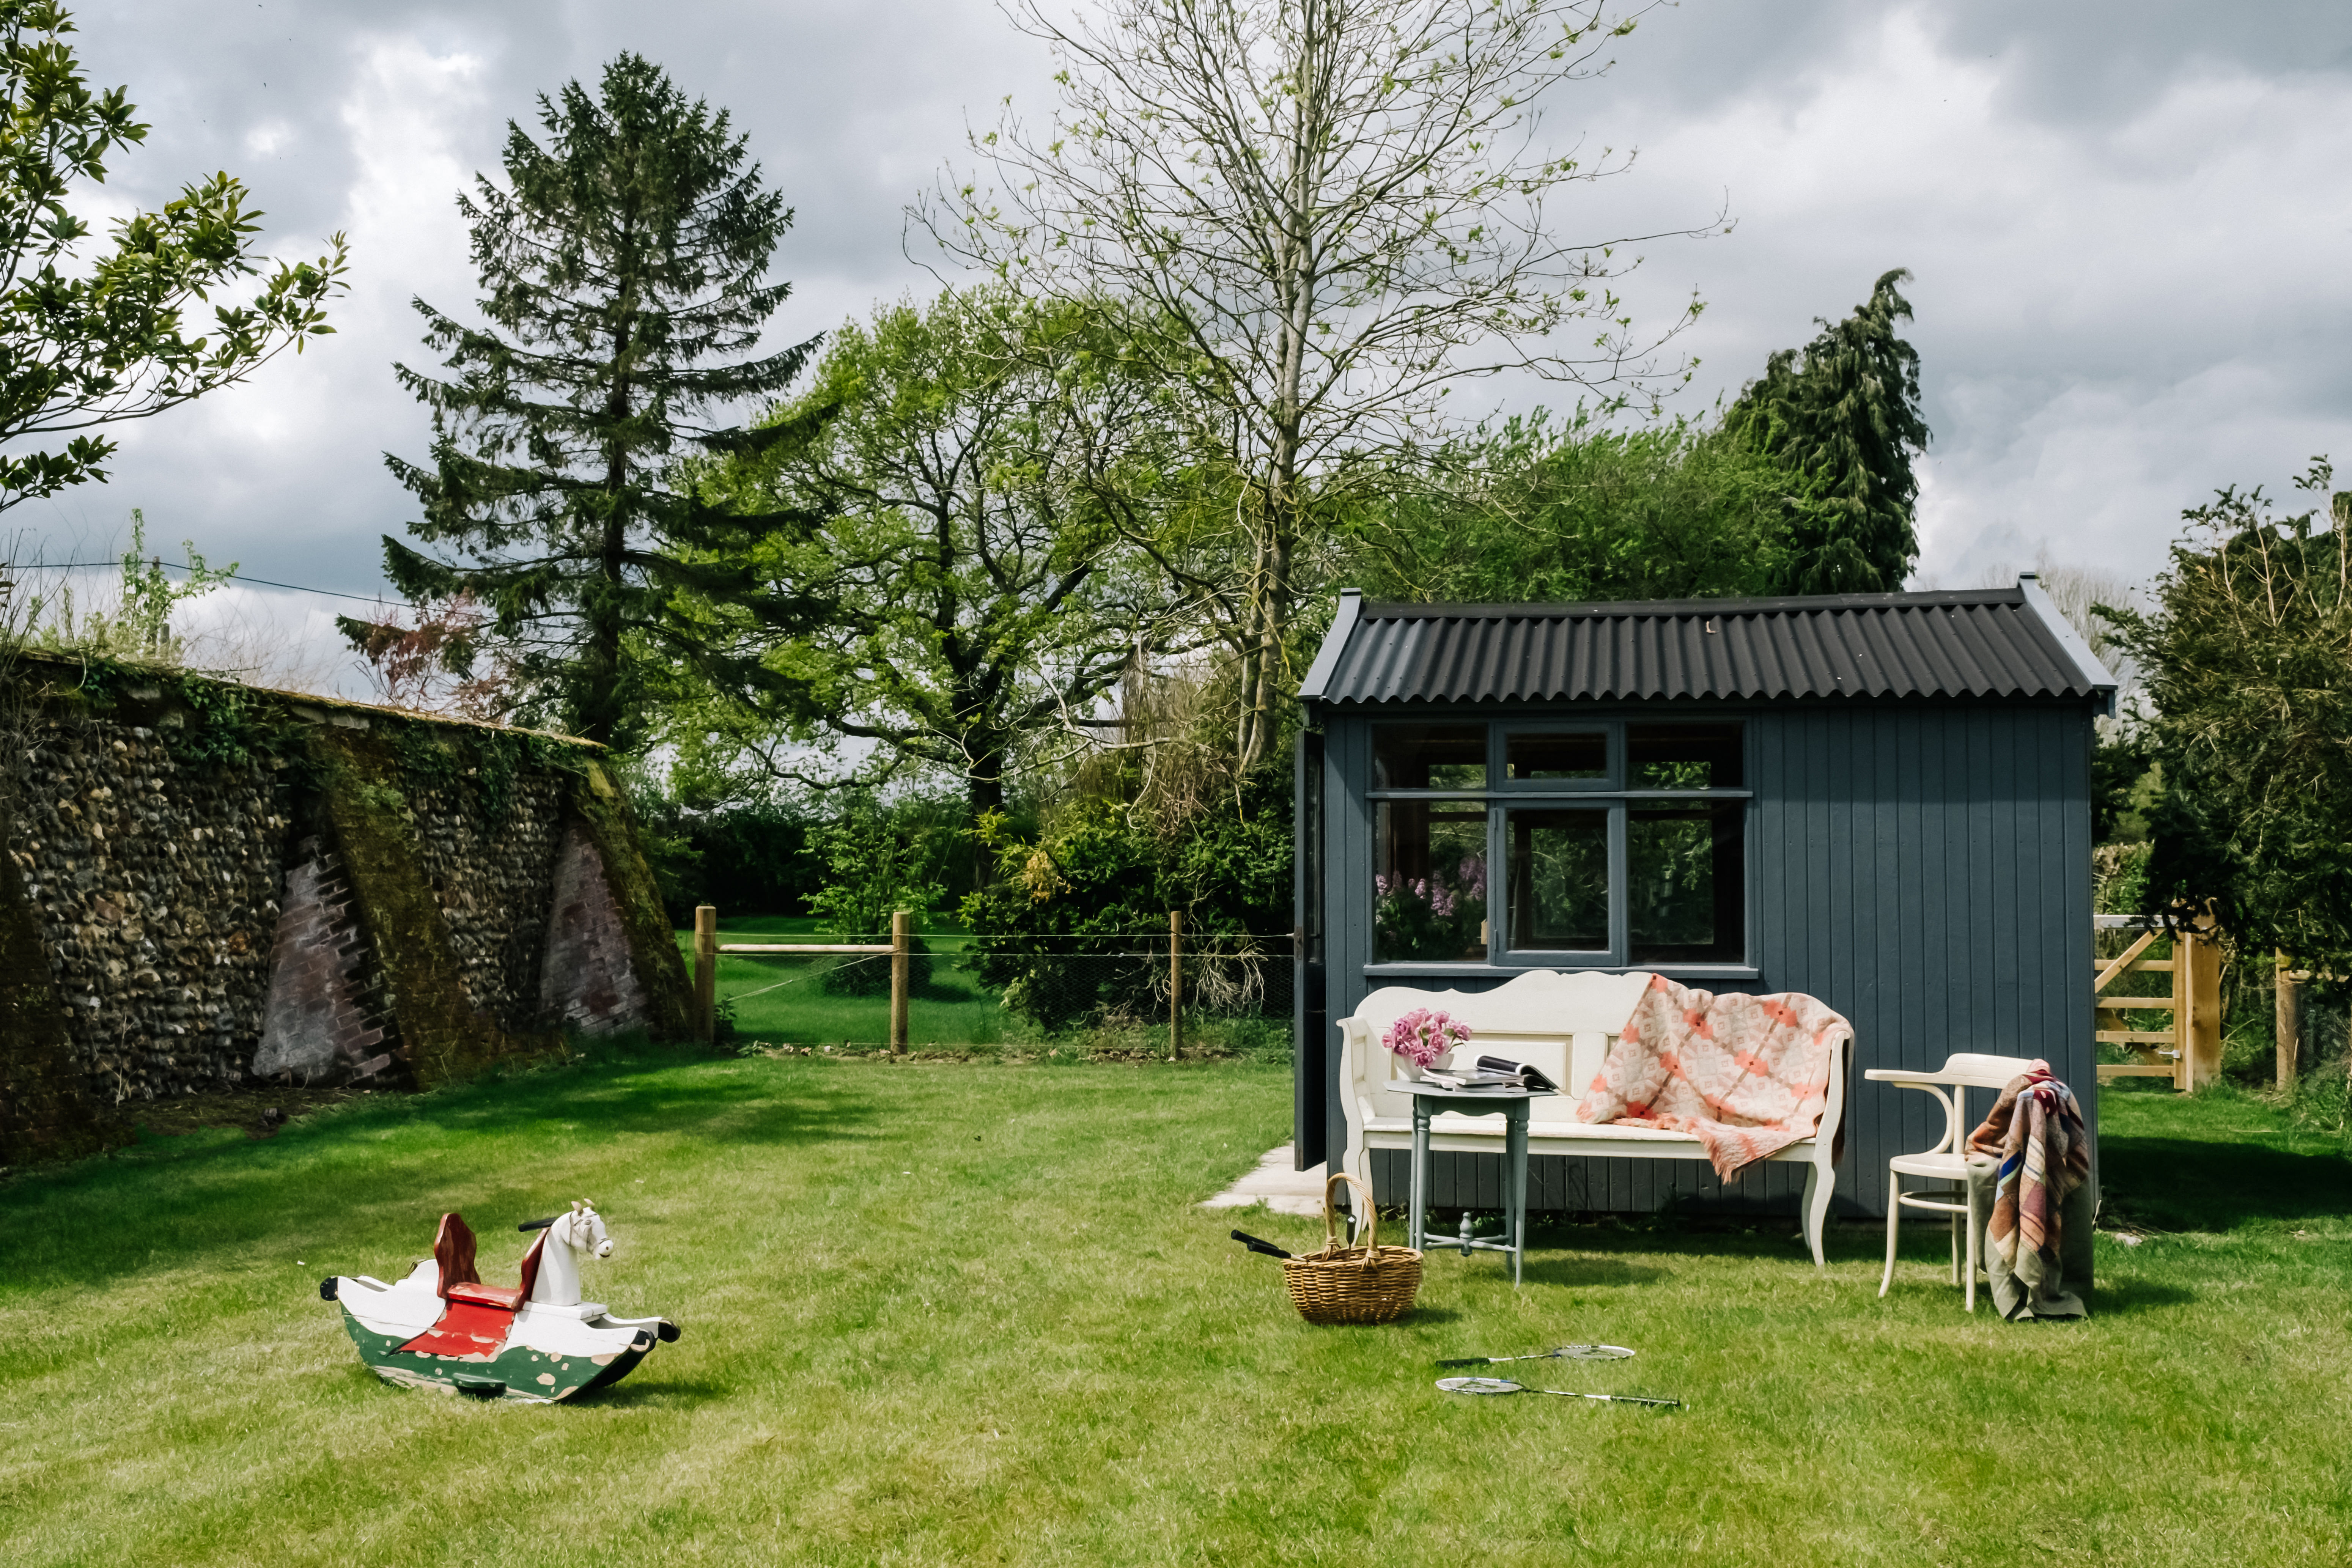 Enjoy tea parties and playtime on the lush, green lawn